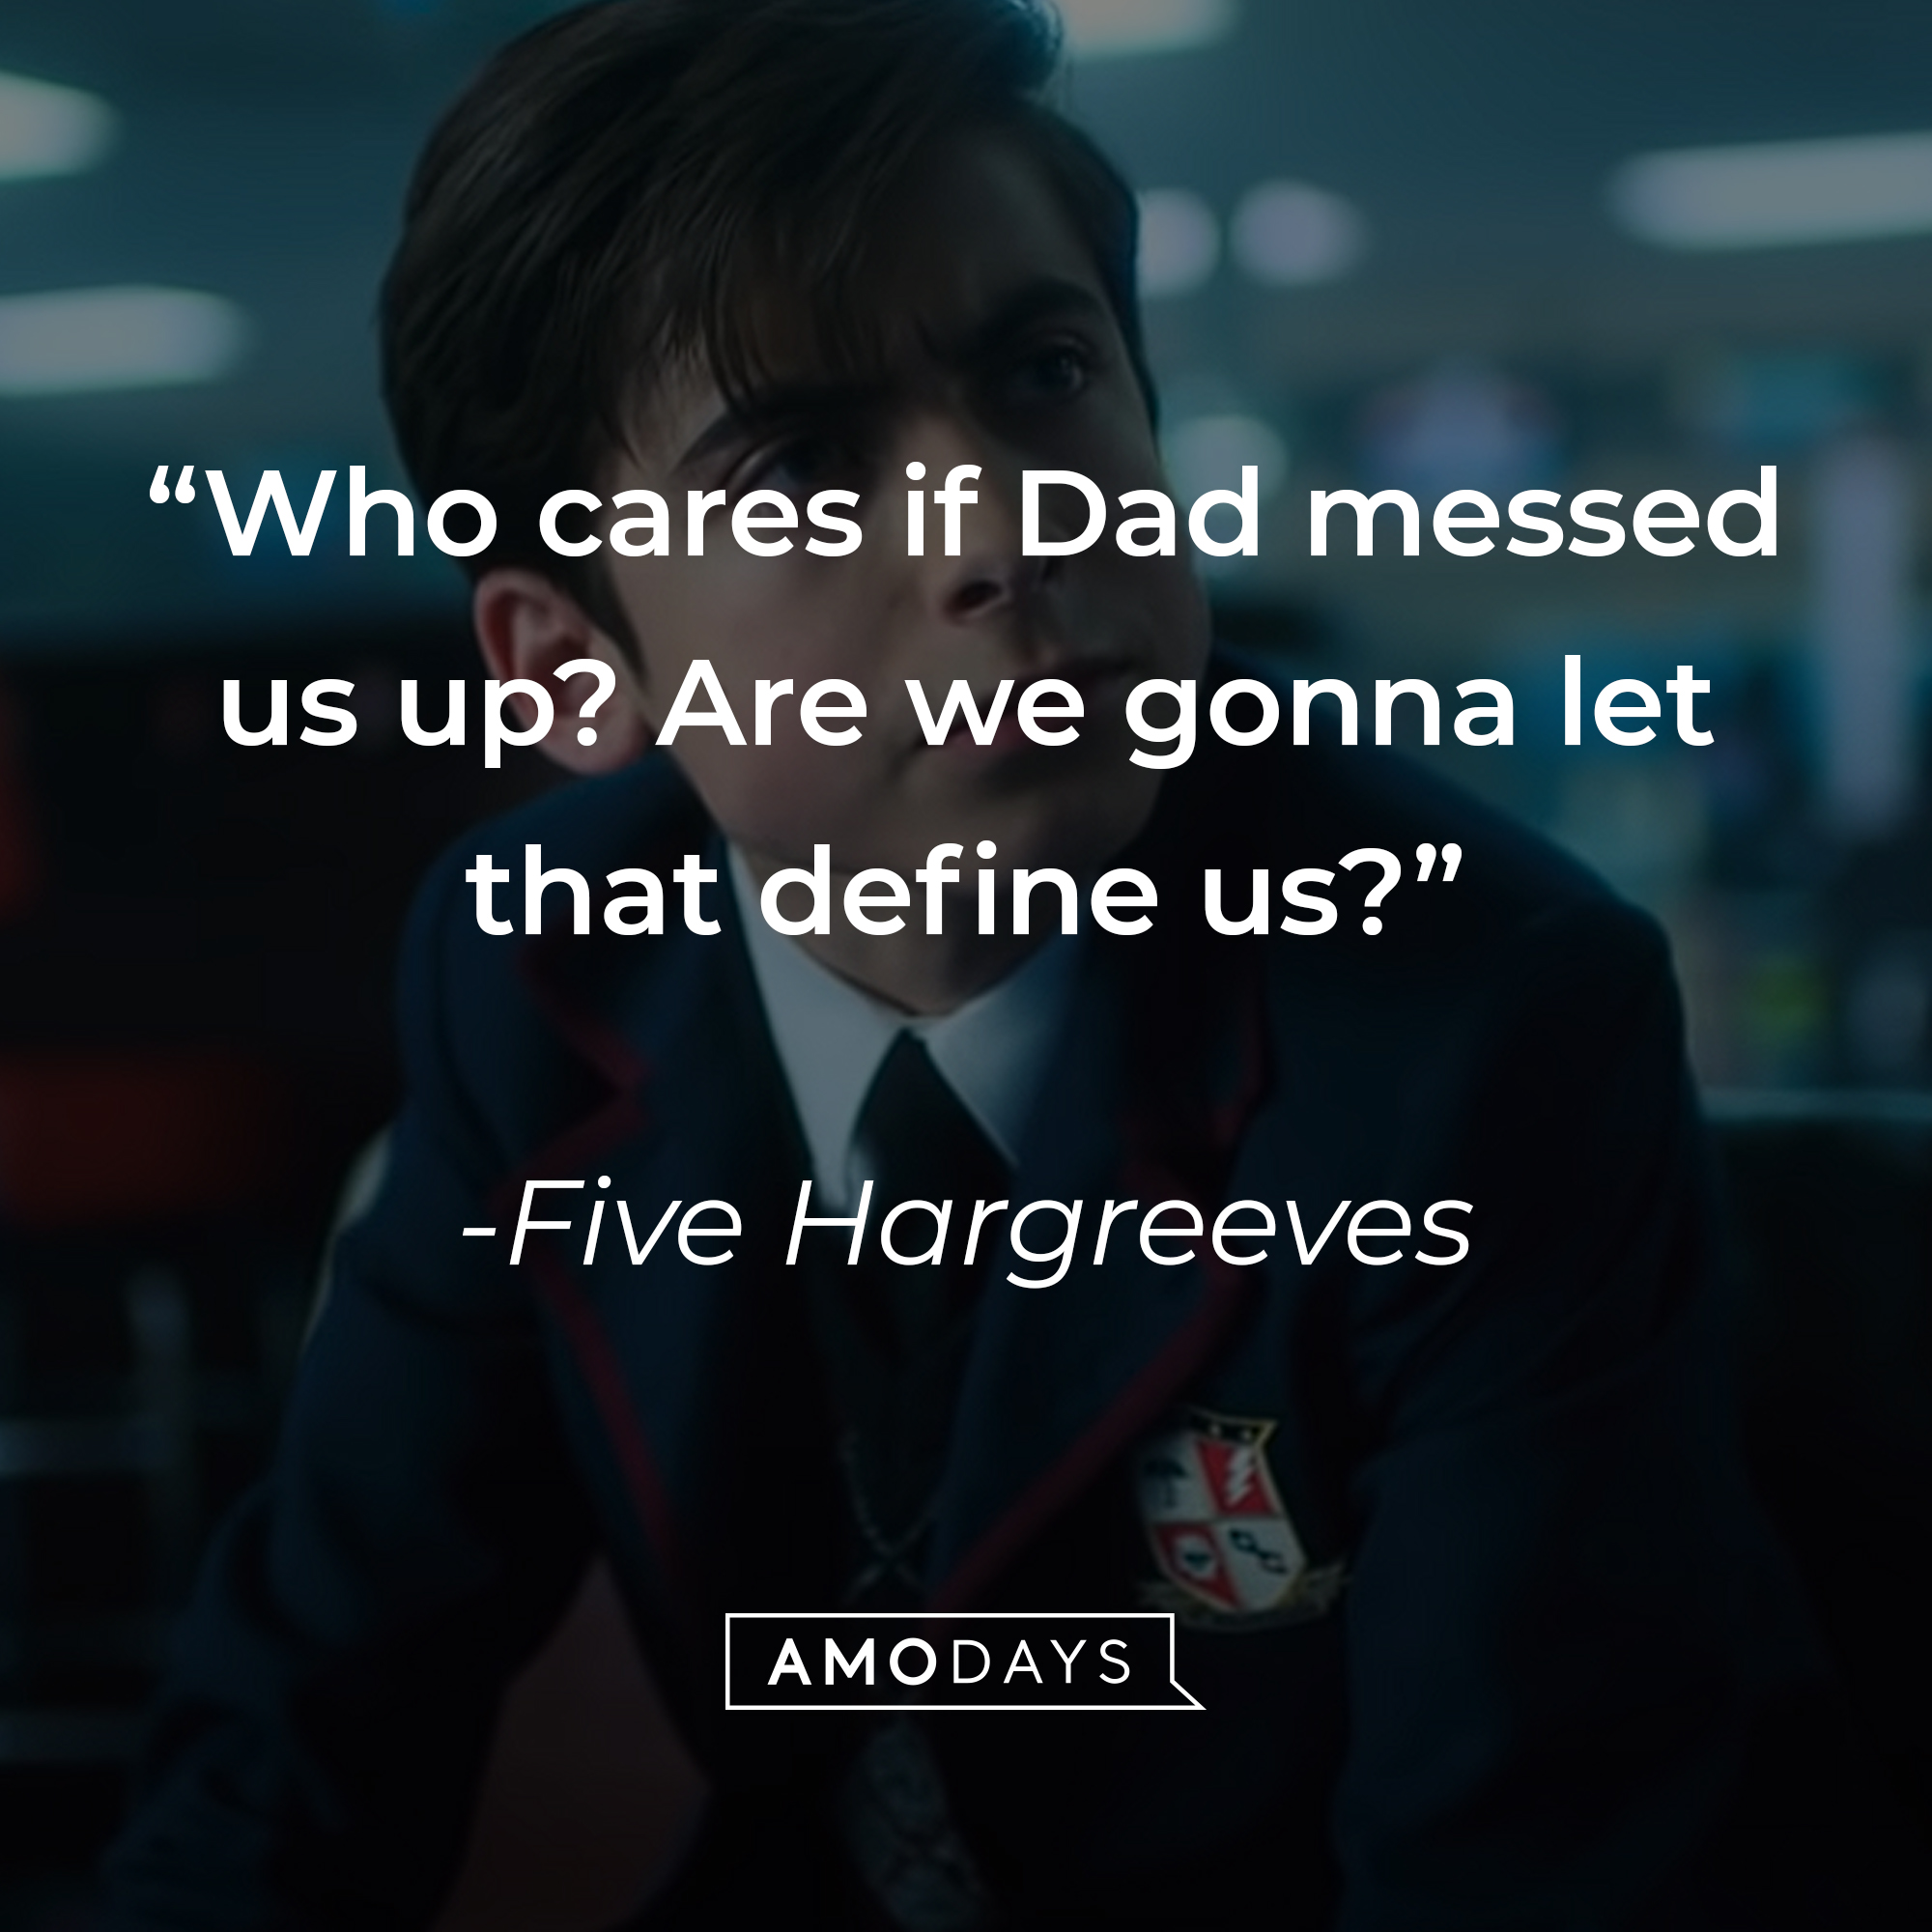 Five Hargreeves’ quote: "Who cares if Dad messed us up? Are we gonna let that define us?” | Source: youtube.com/Netflix